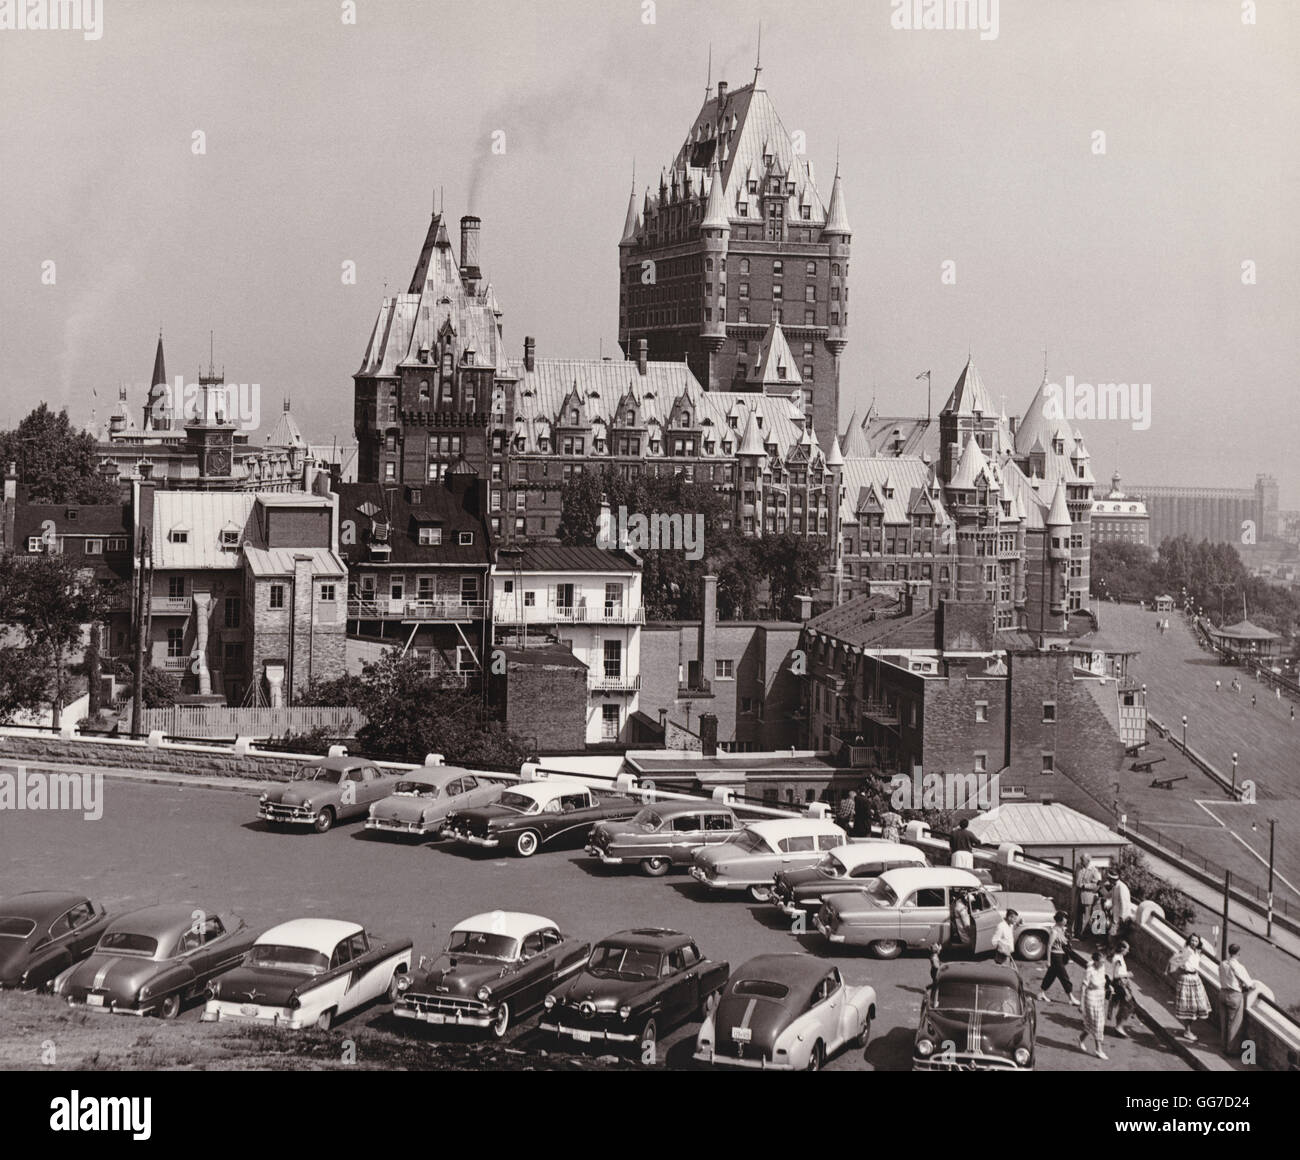 Chateau Frontenac, photographed in the mid-1950s from the Citadelle of Quebec, Quebec City, QC, Canada. Stock Photo